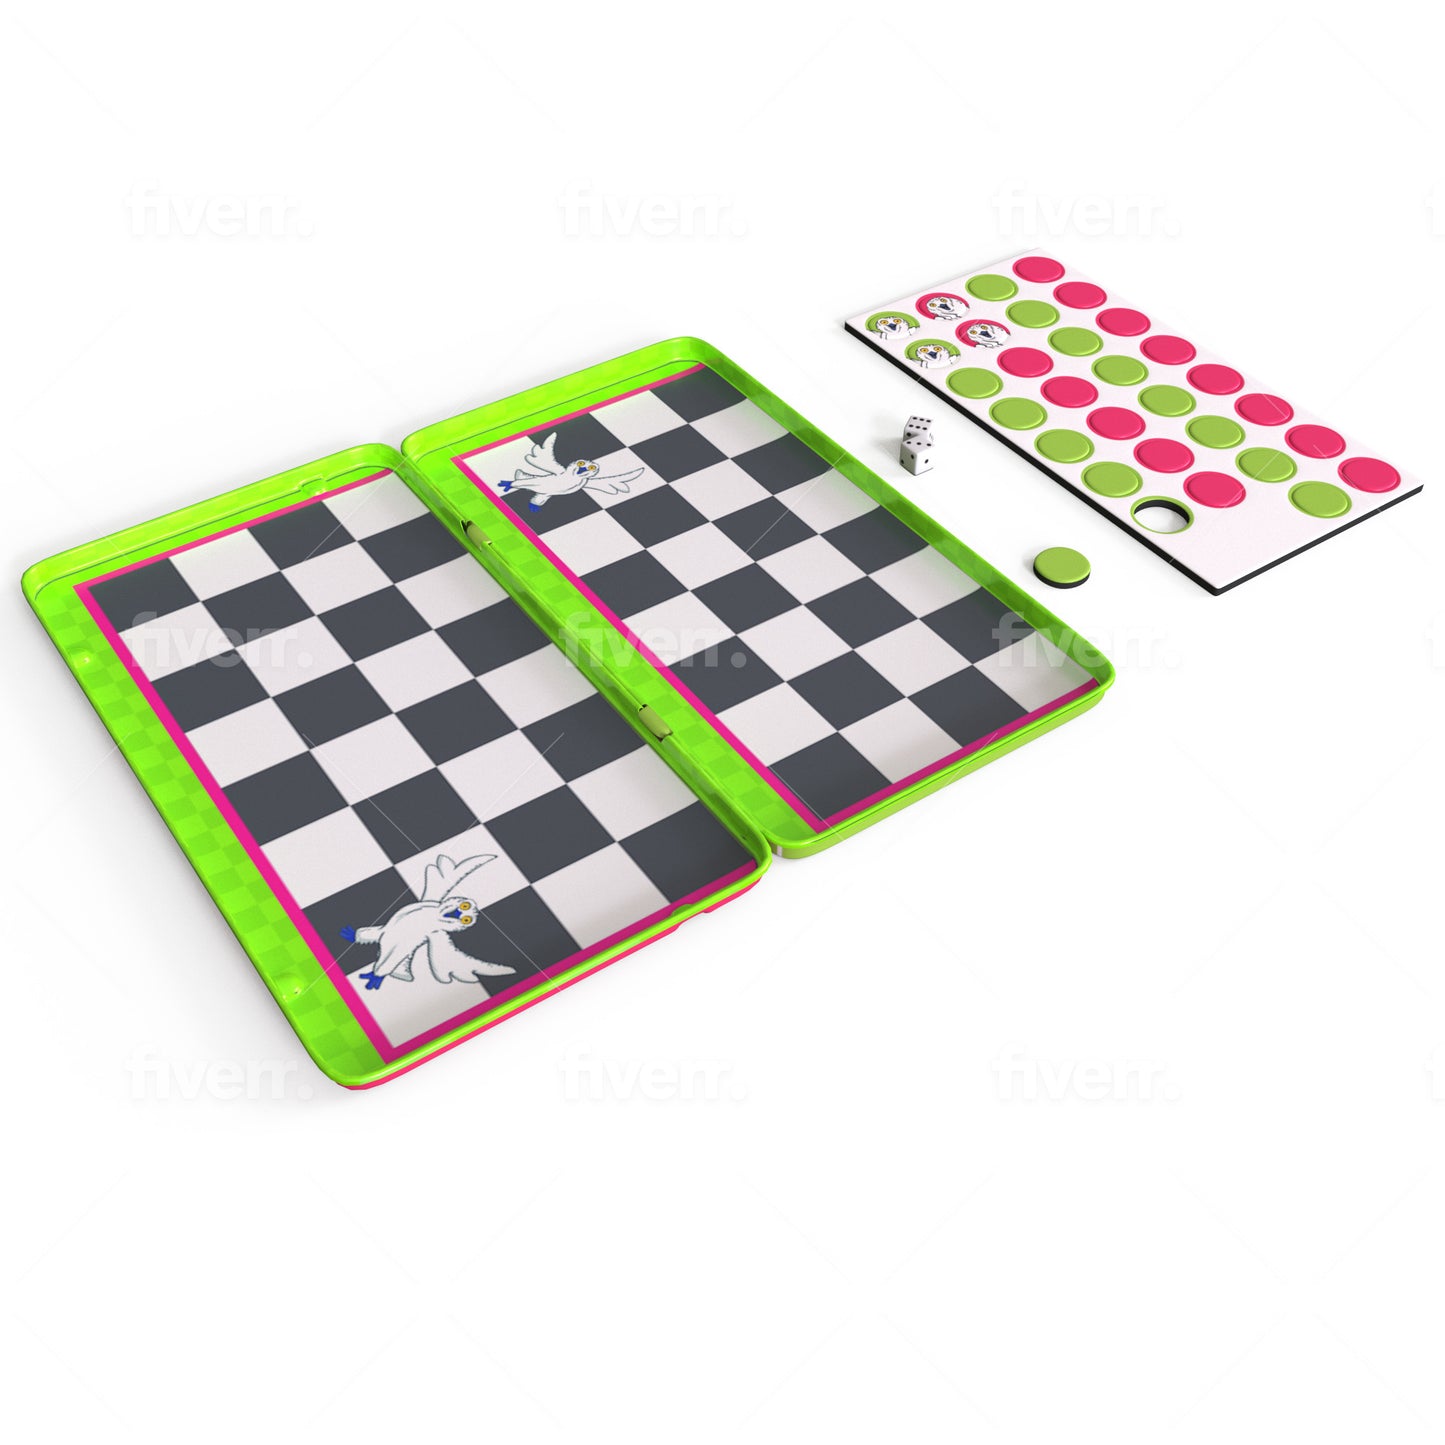 6 pack of Backgammon or Checkers